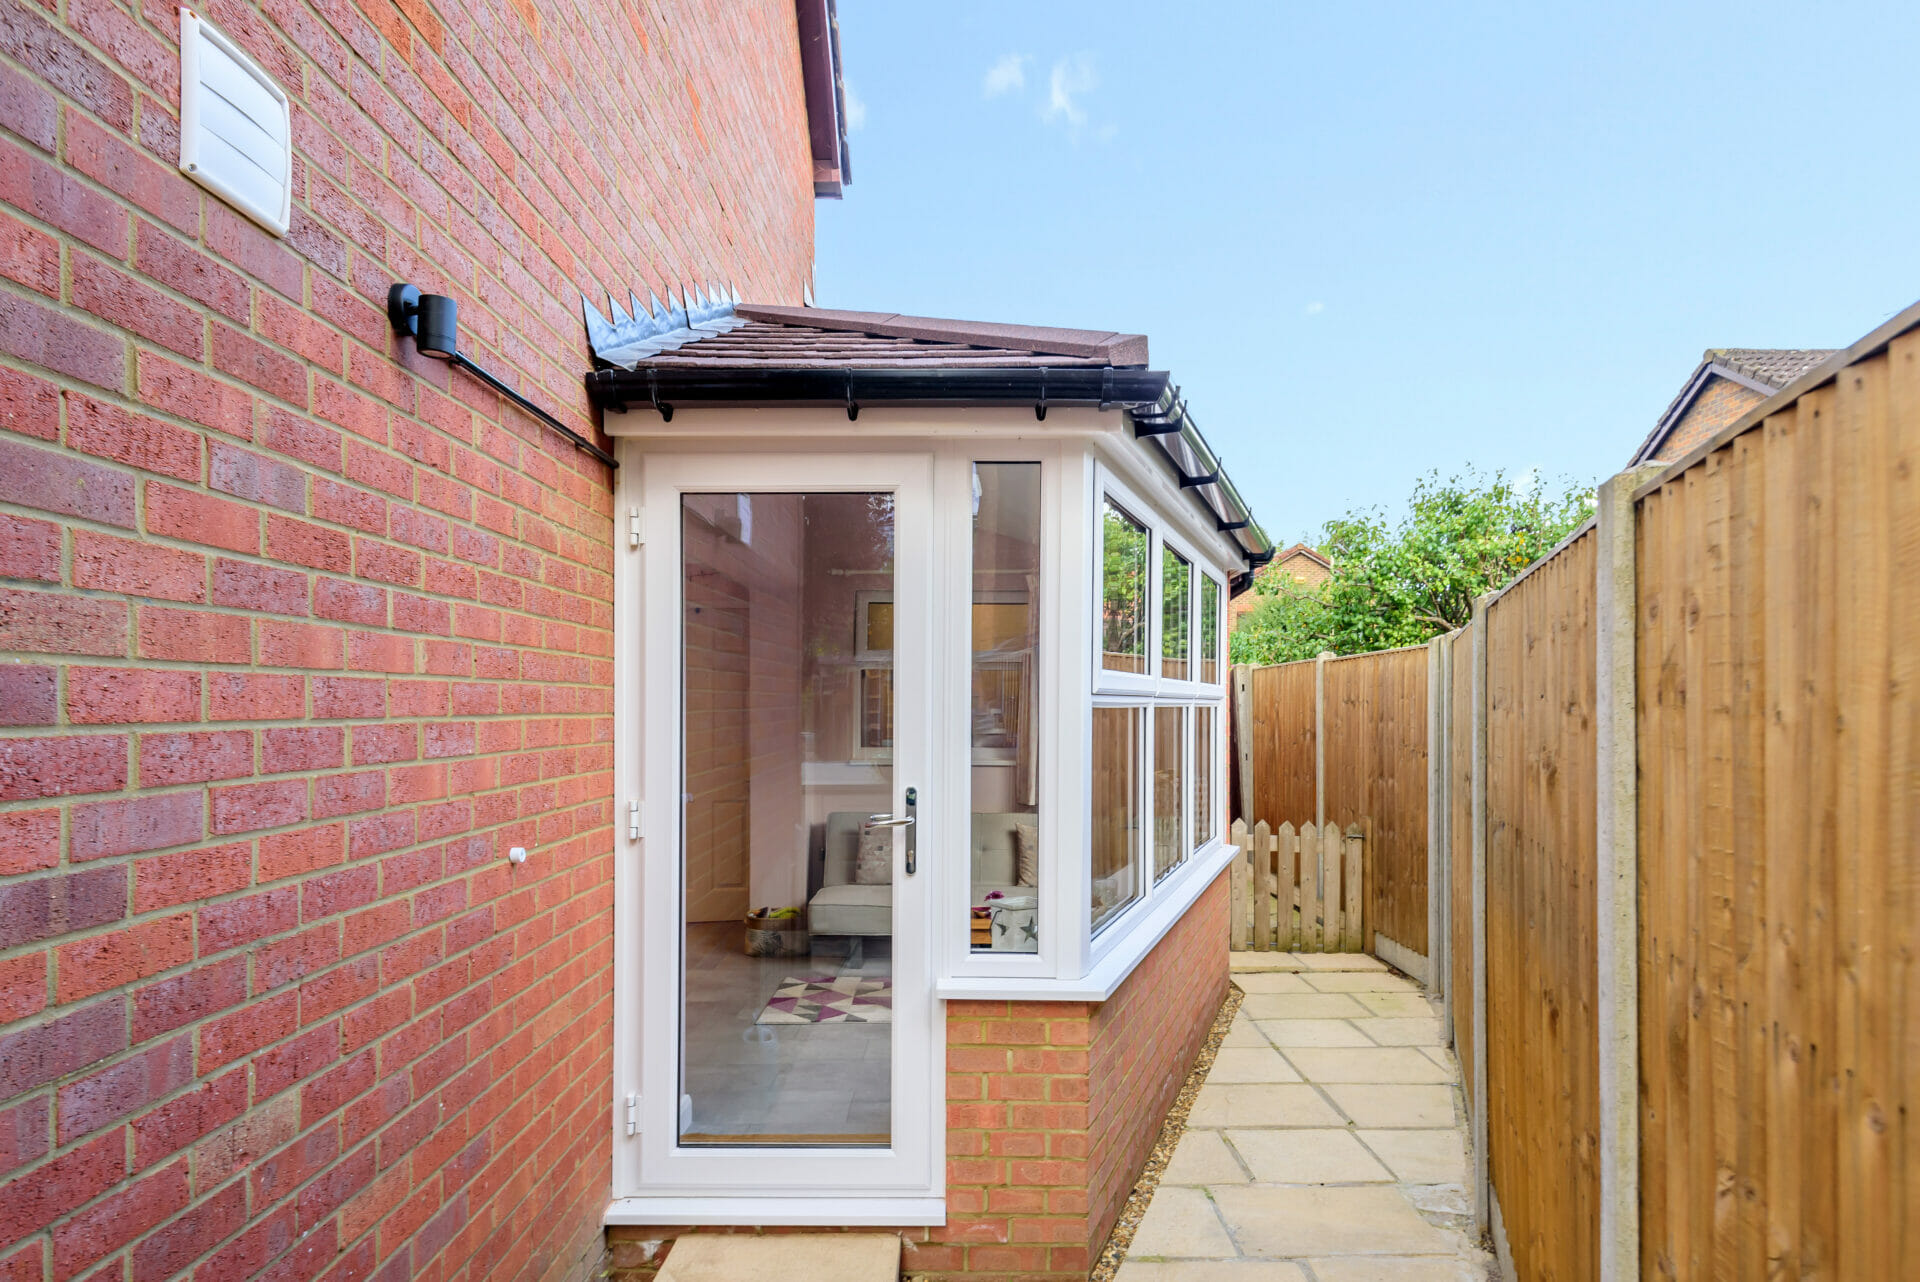 A brand new conservatory with solid warm roof - farnborough - 900762 1 - three counties ltd